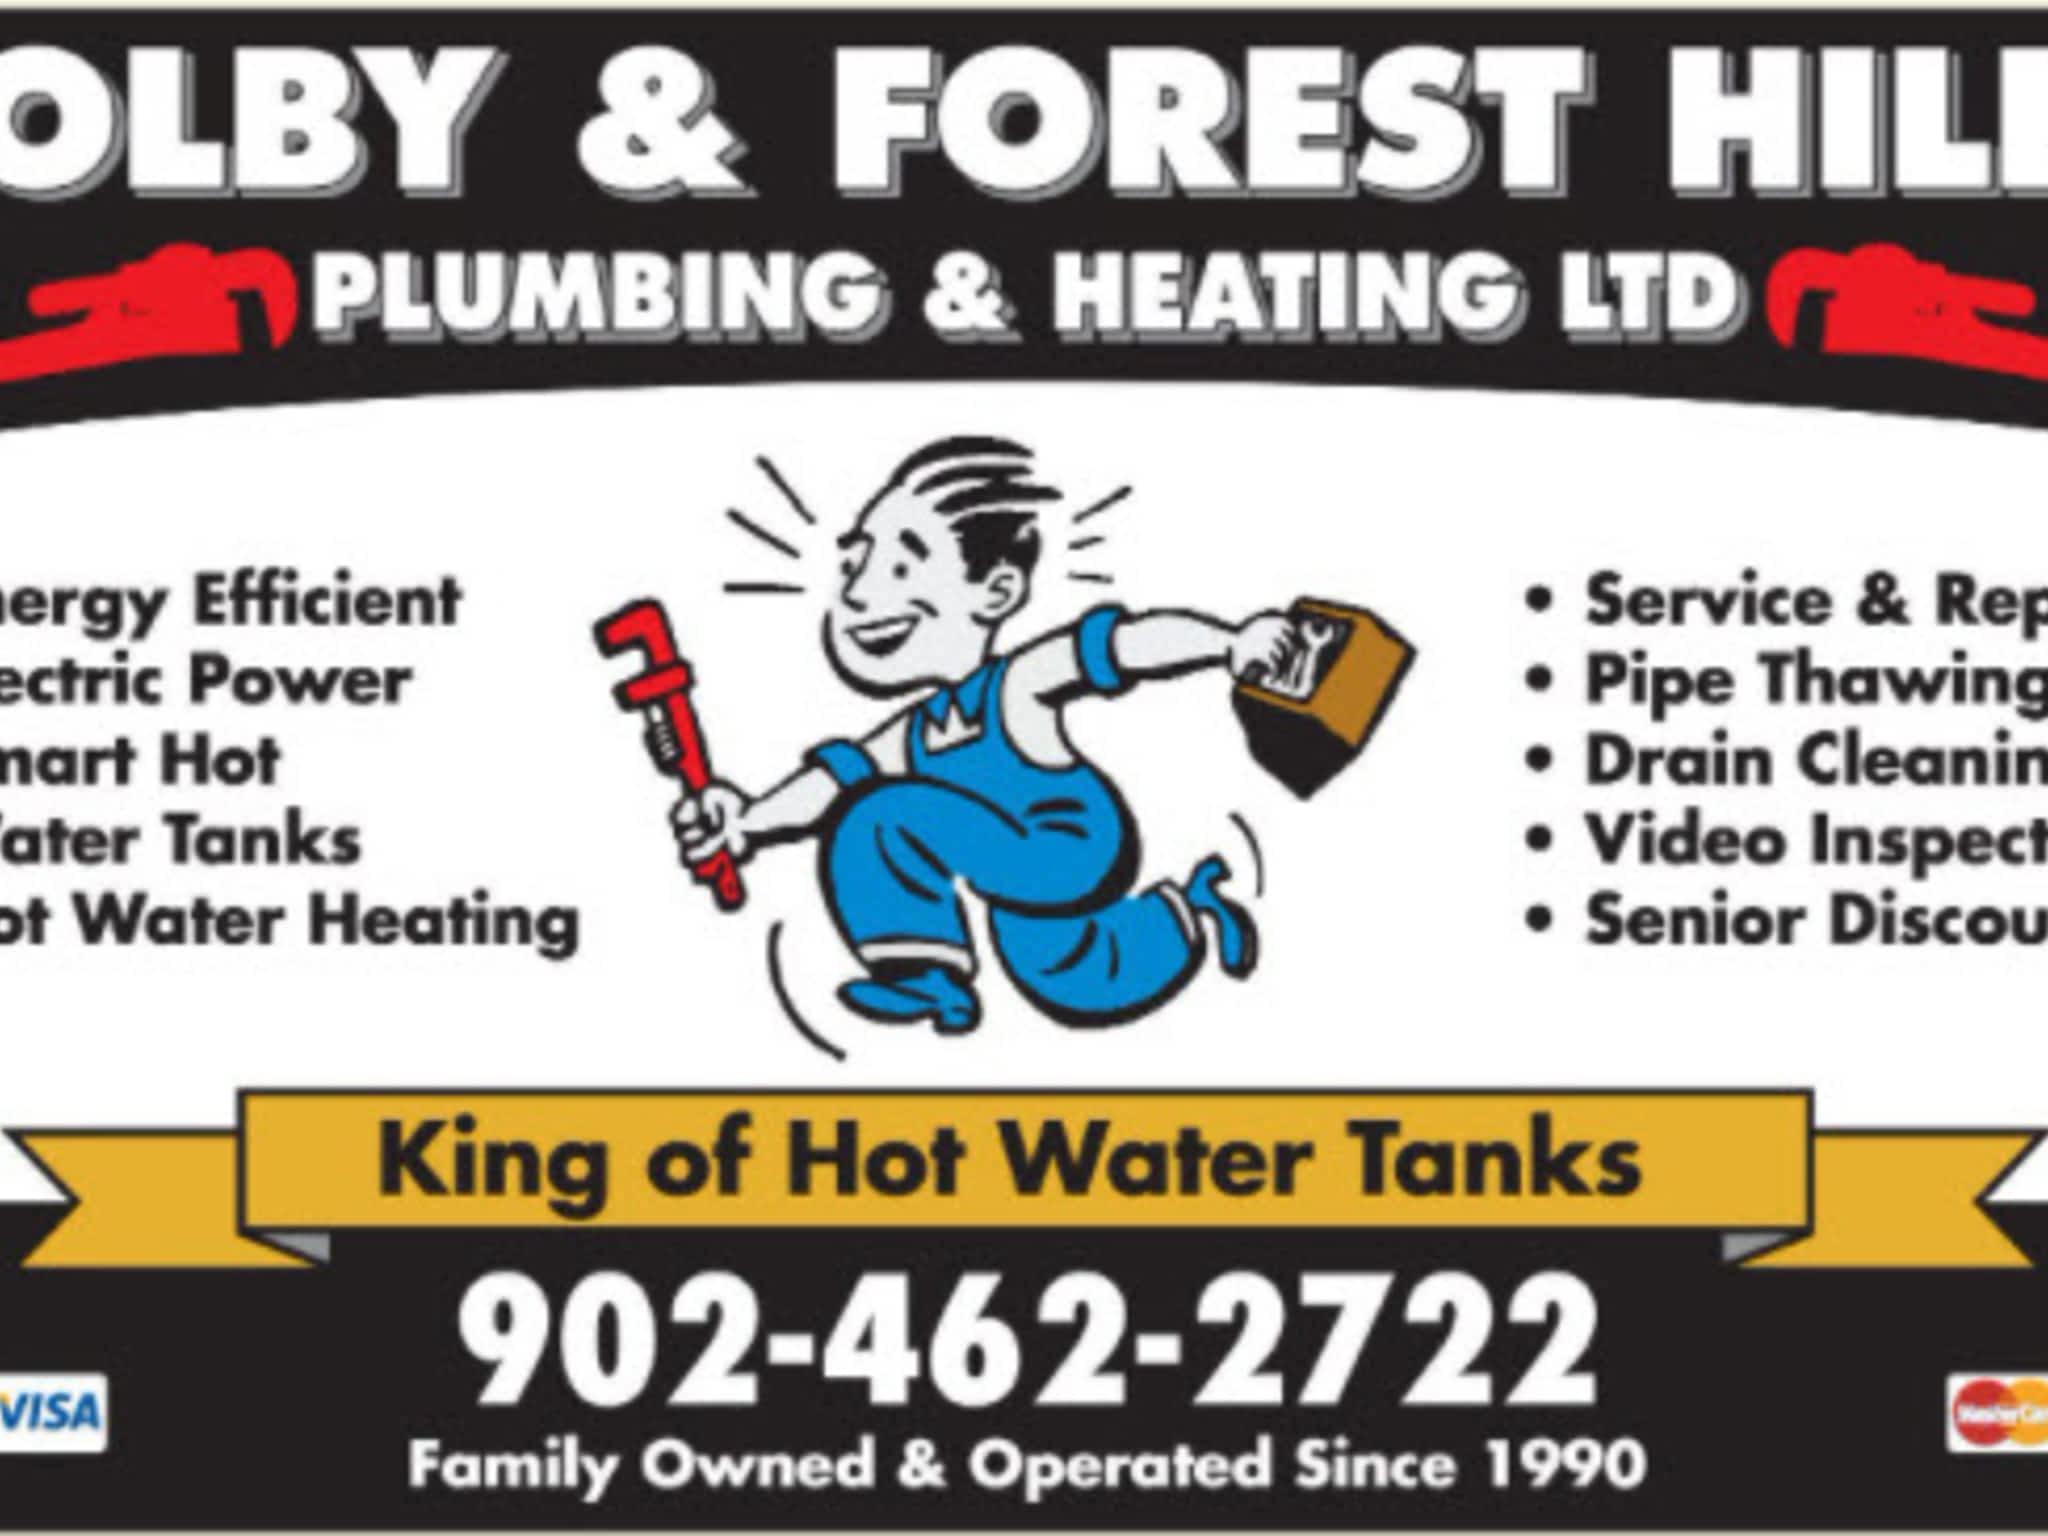 photo Colby & Forest Hills Plumbing & Heating Ltd